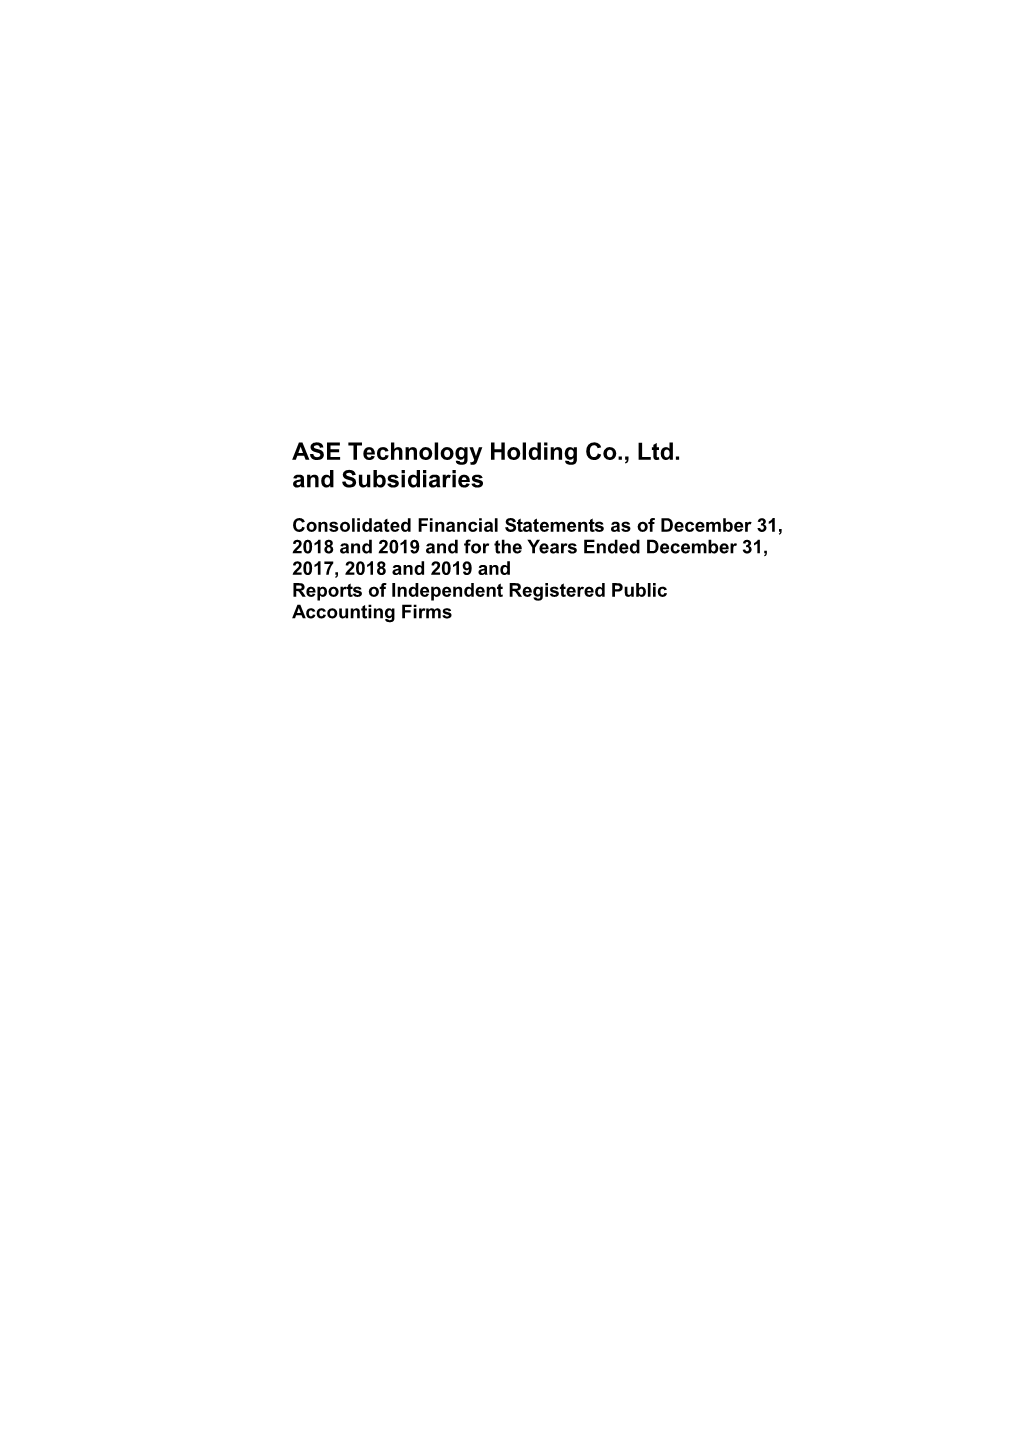 ASE Technology Holding Co., Ltd. and Subsidiaries